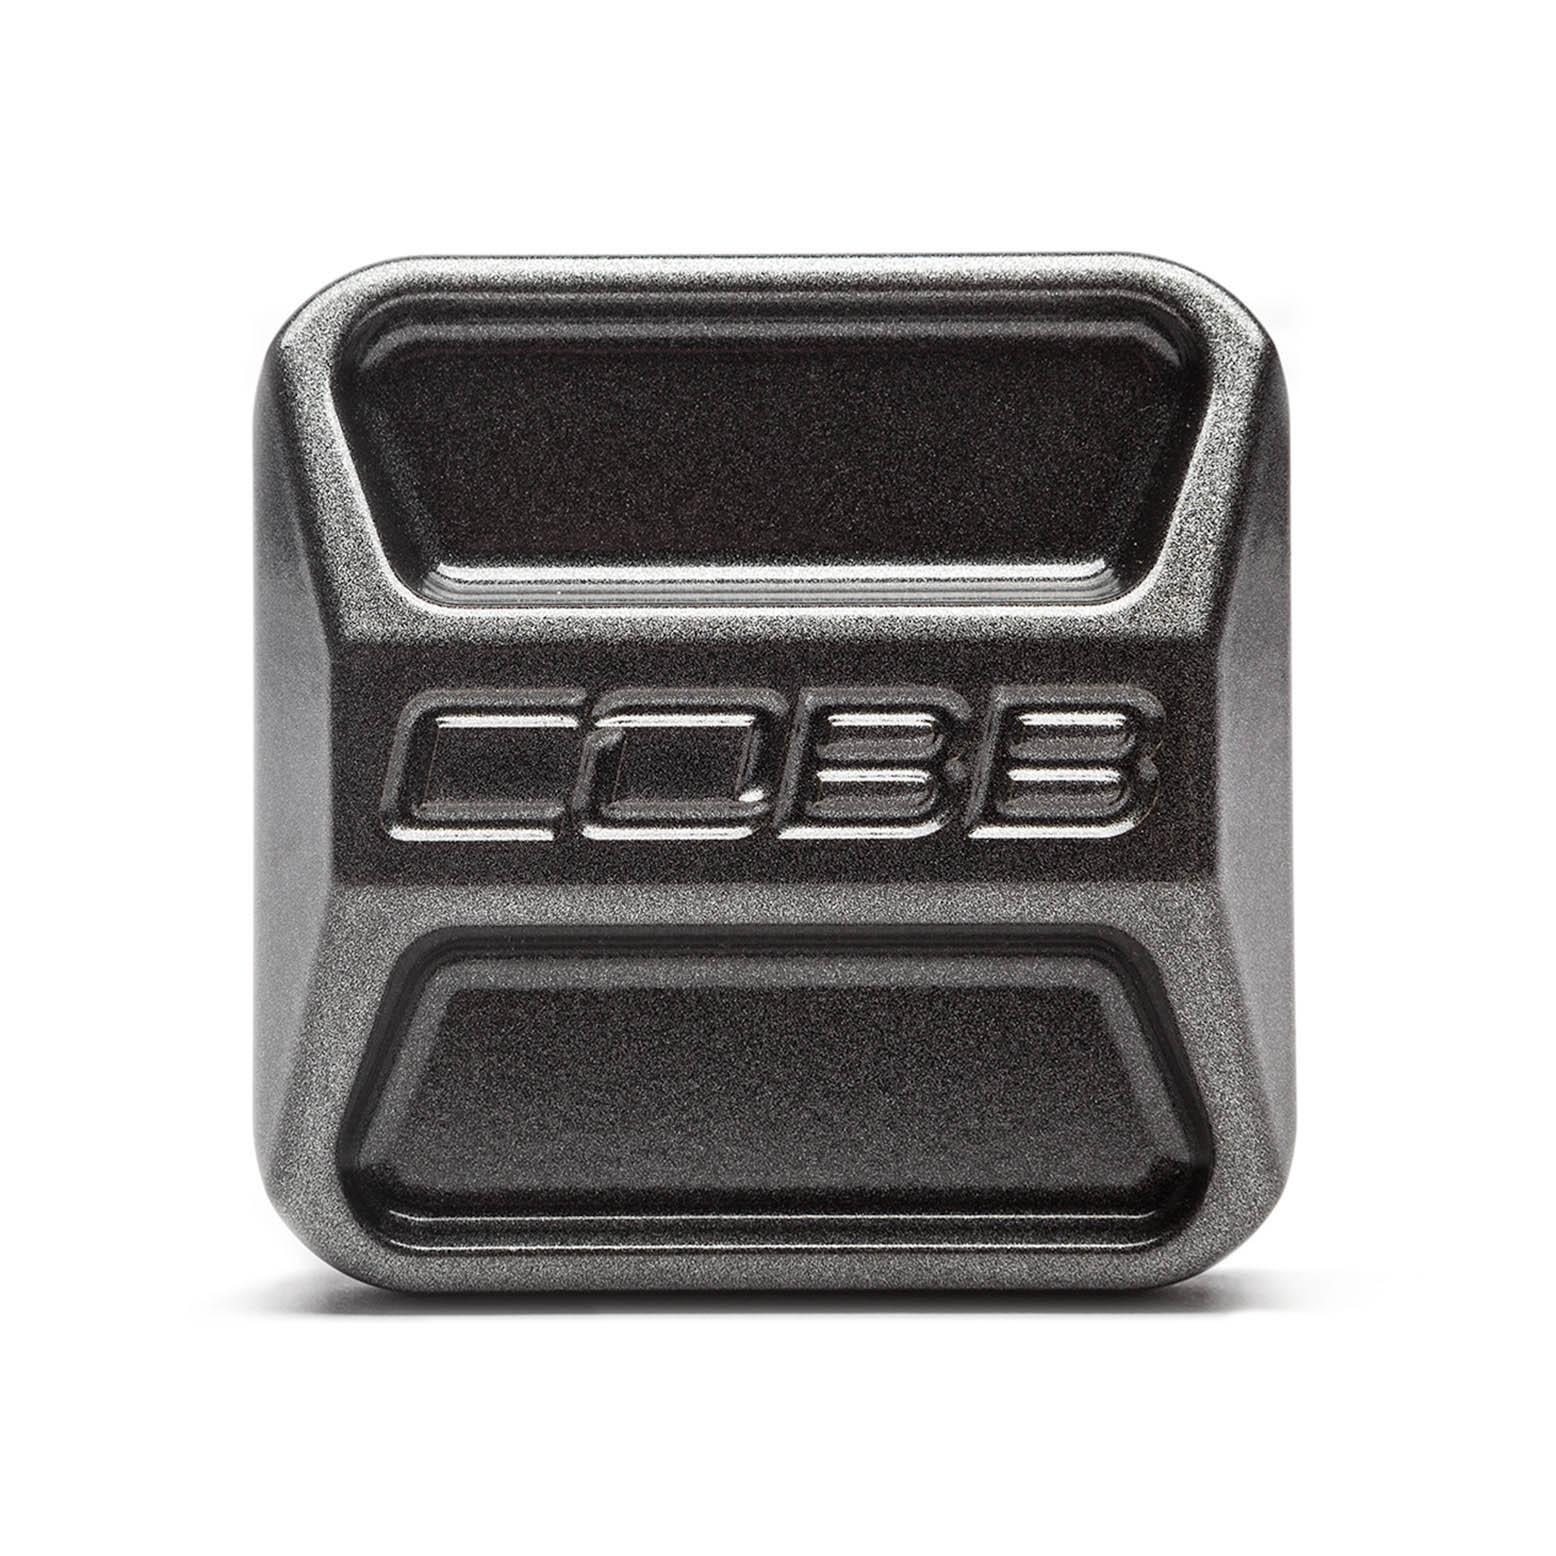 Universal Gray Hitch Cover